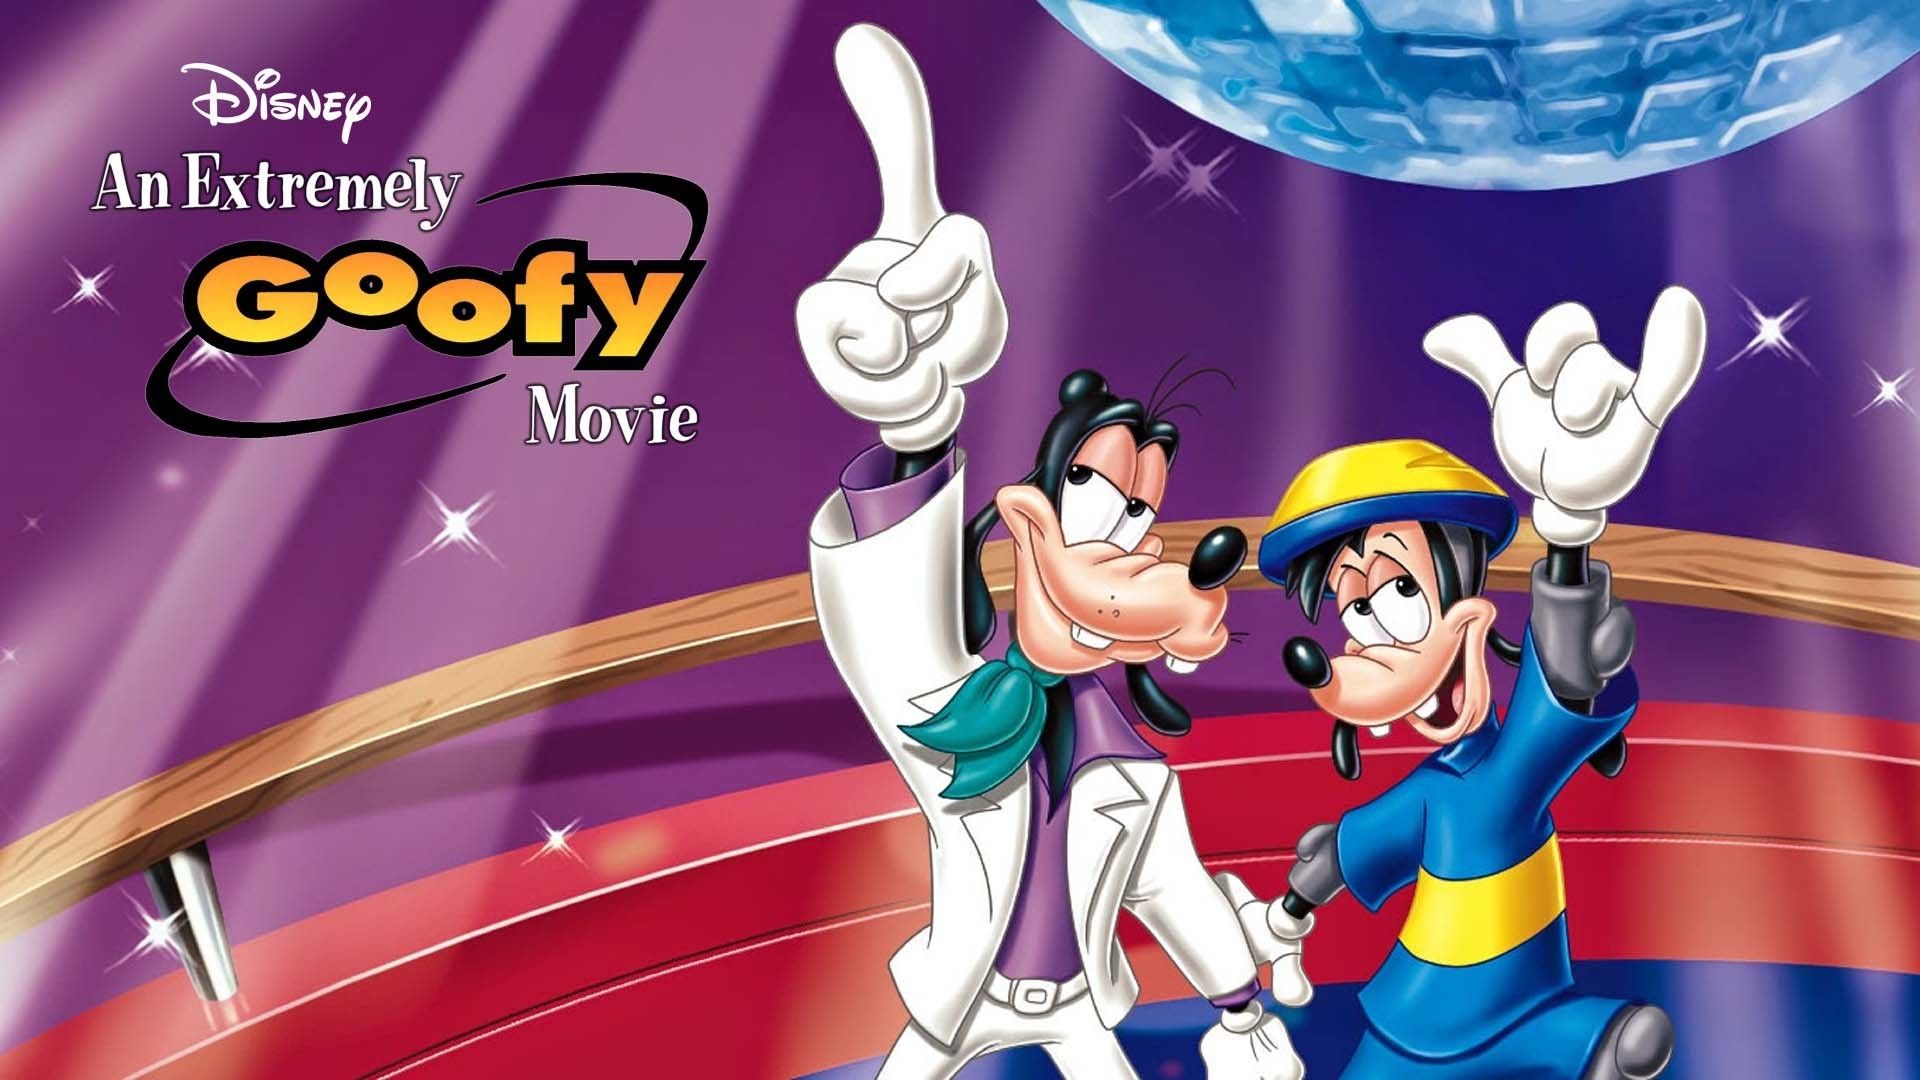 An Extremely Goofy Movie (2000) on Disney+ or Streaming